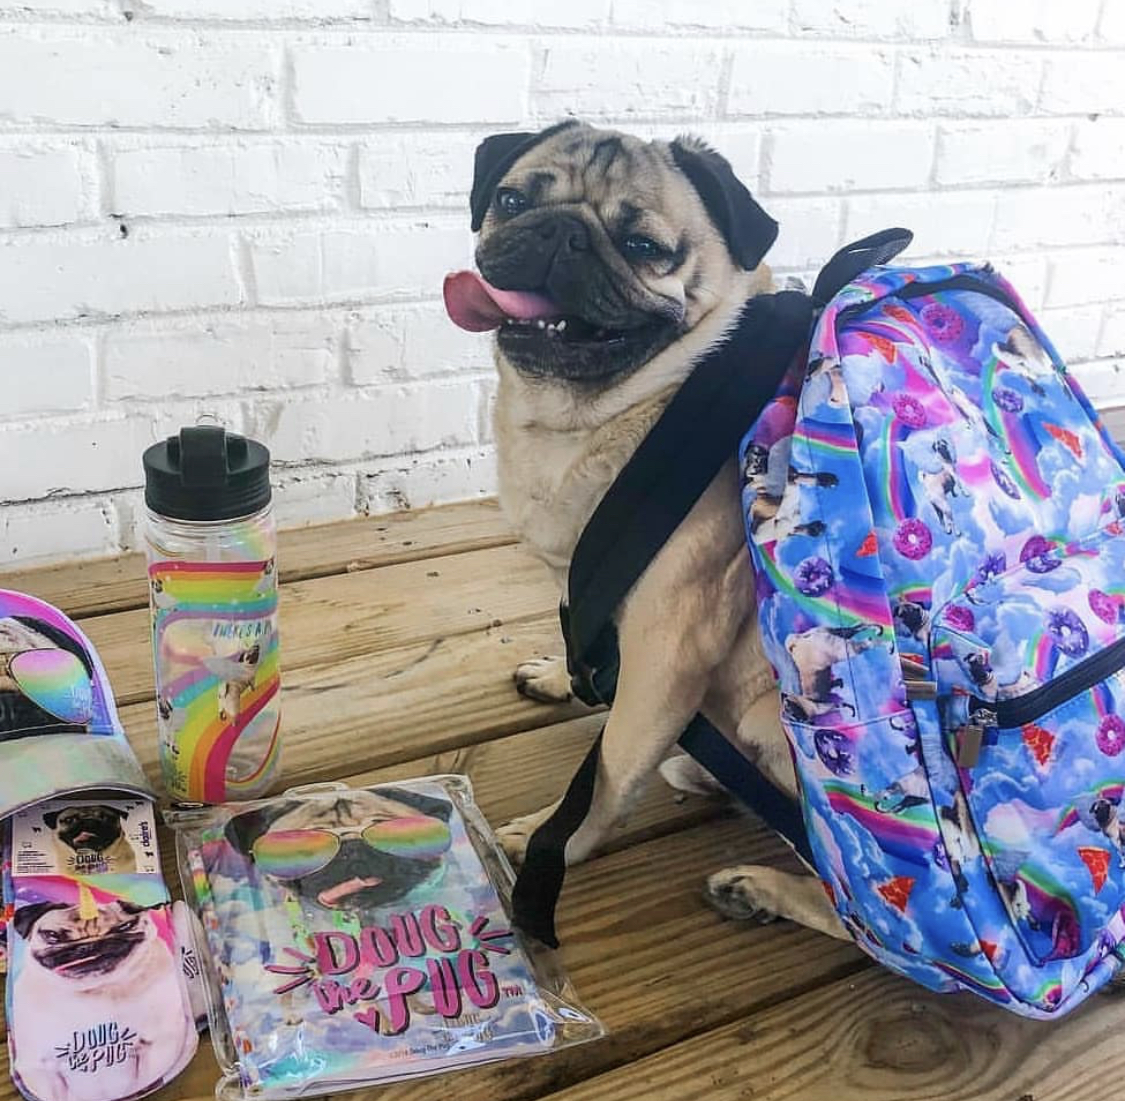 A Pug wearing a back pack designed with clouds, rainbows, and pug sitting on the wooden table next to other items with same design